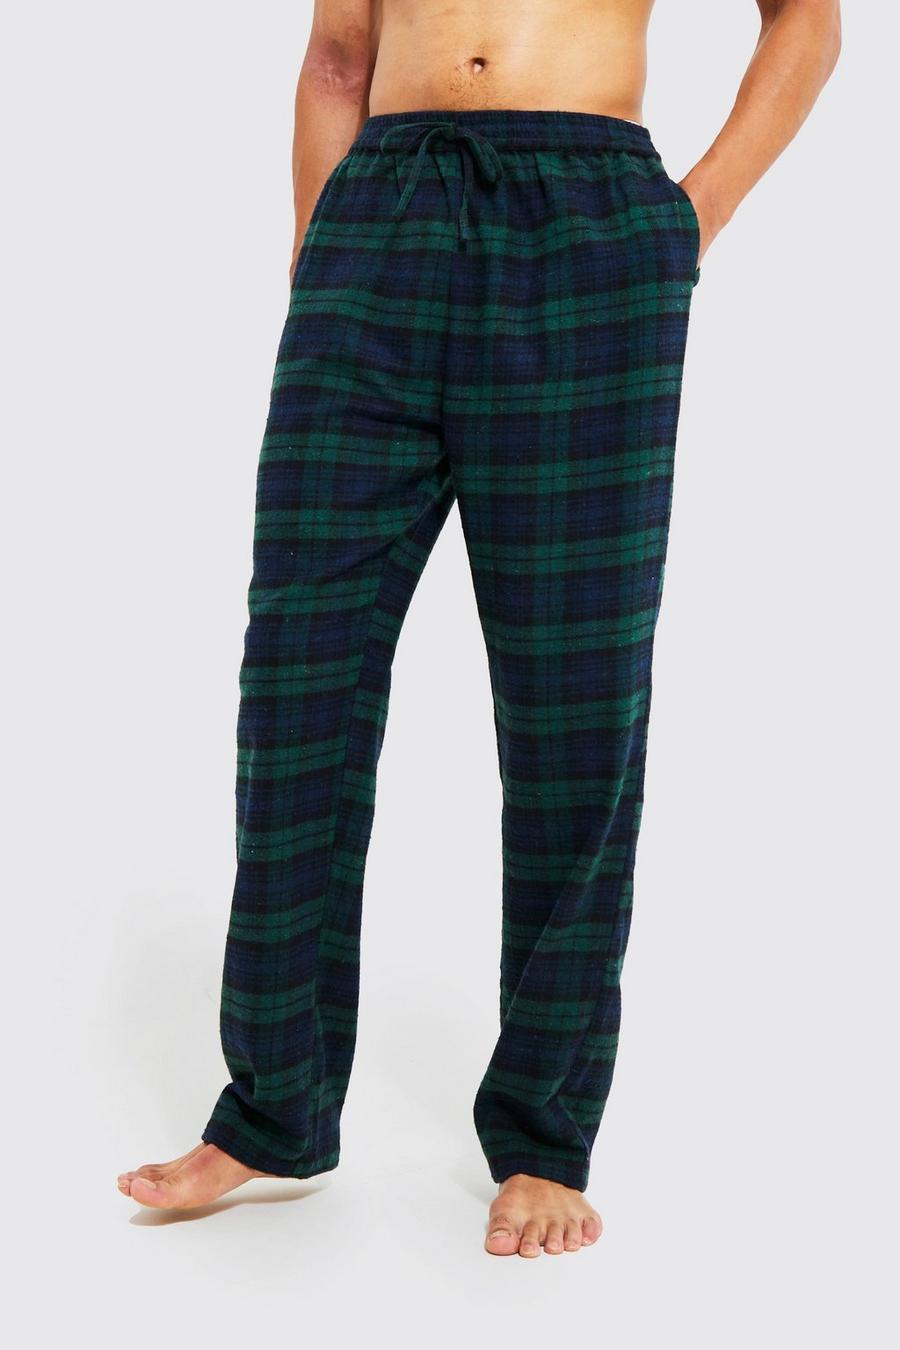 Green Tall Woven Check Loungewear Pants image number 1